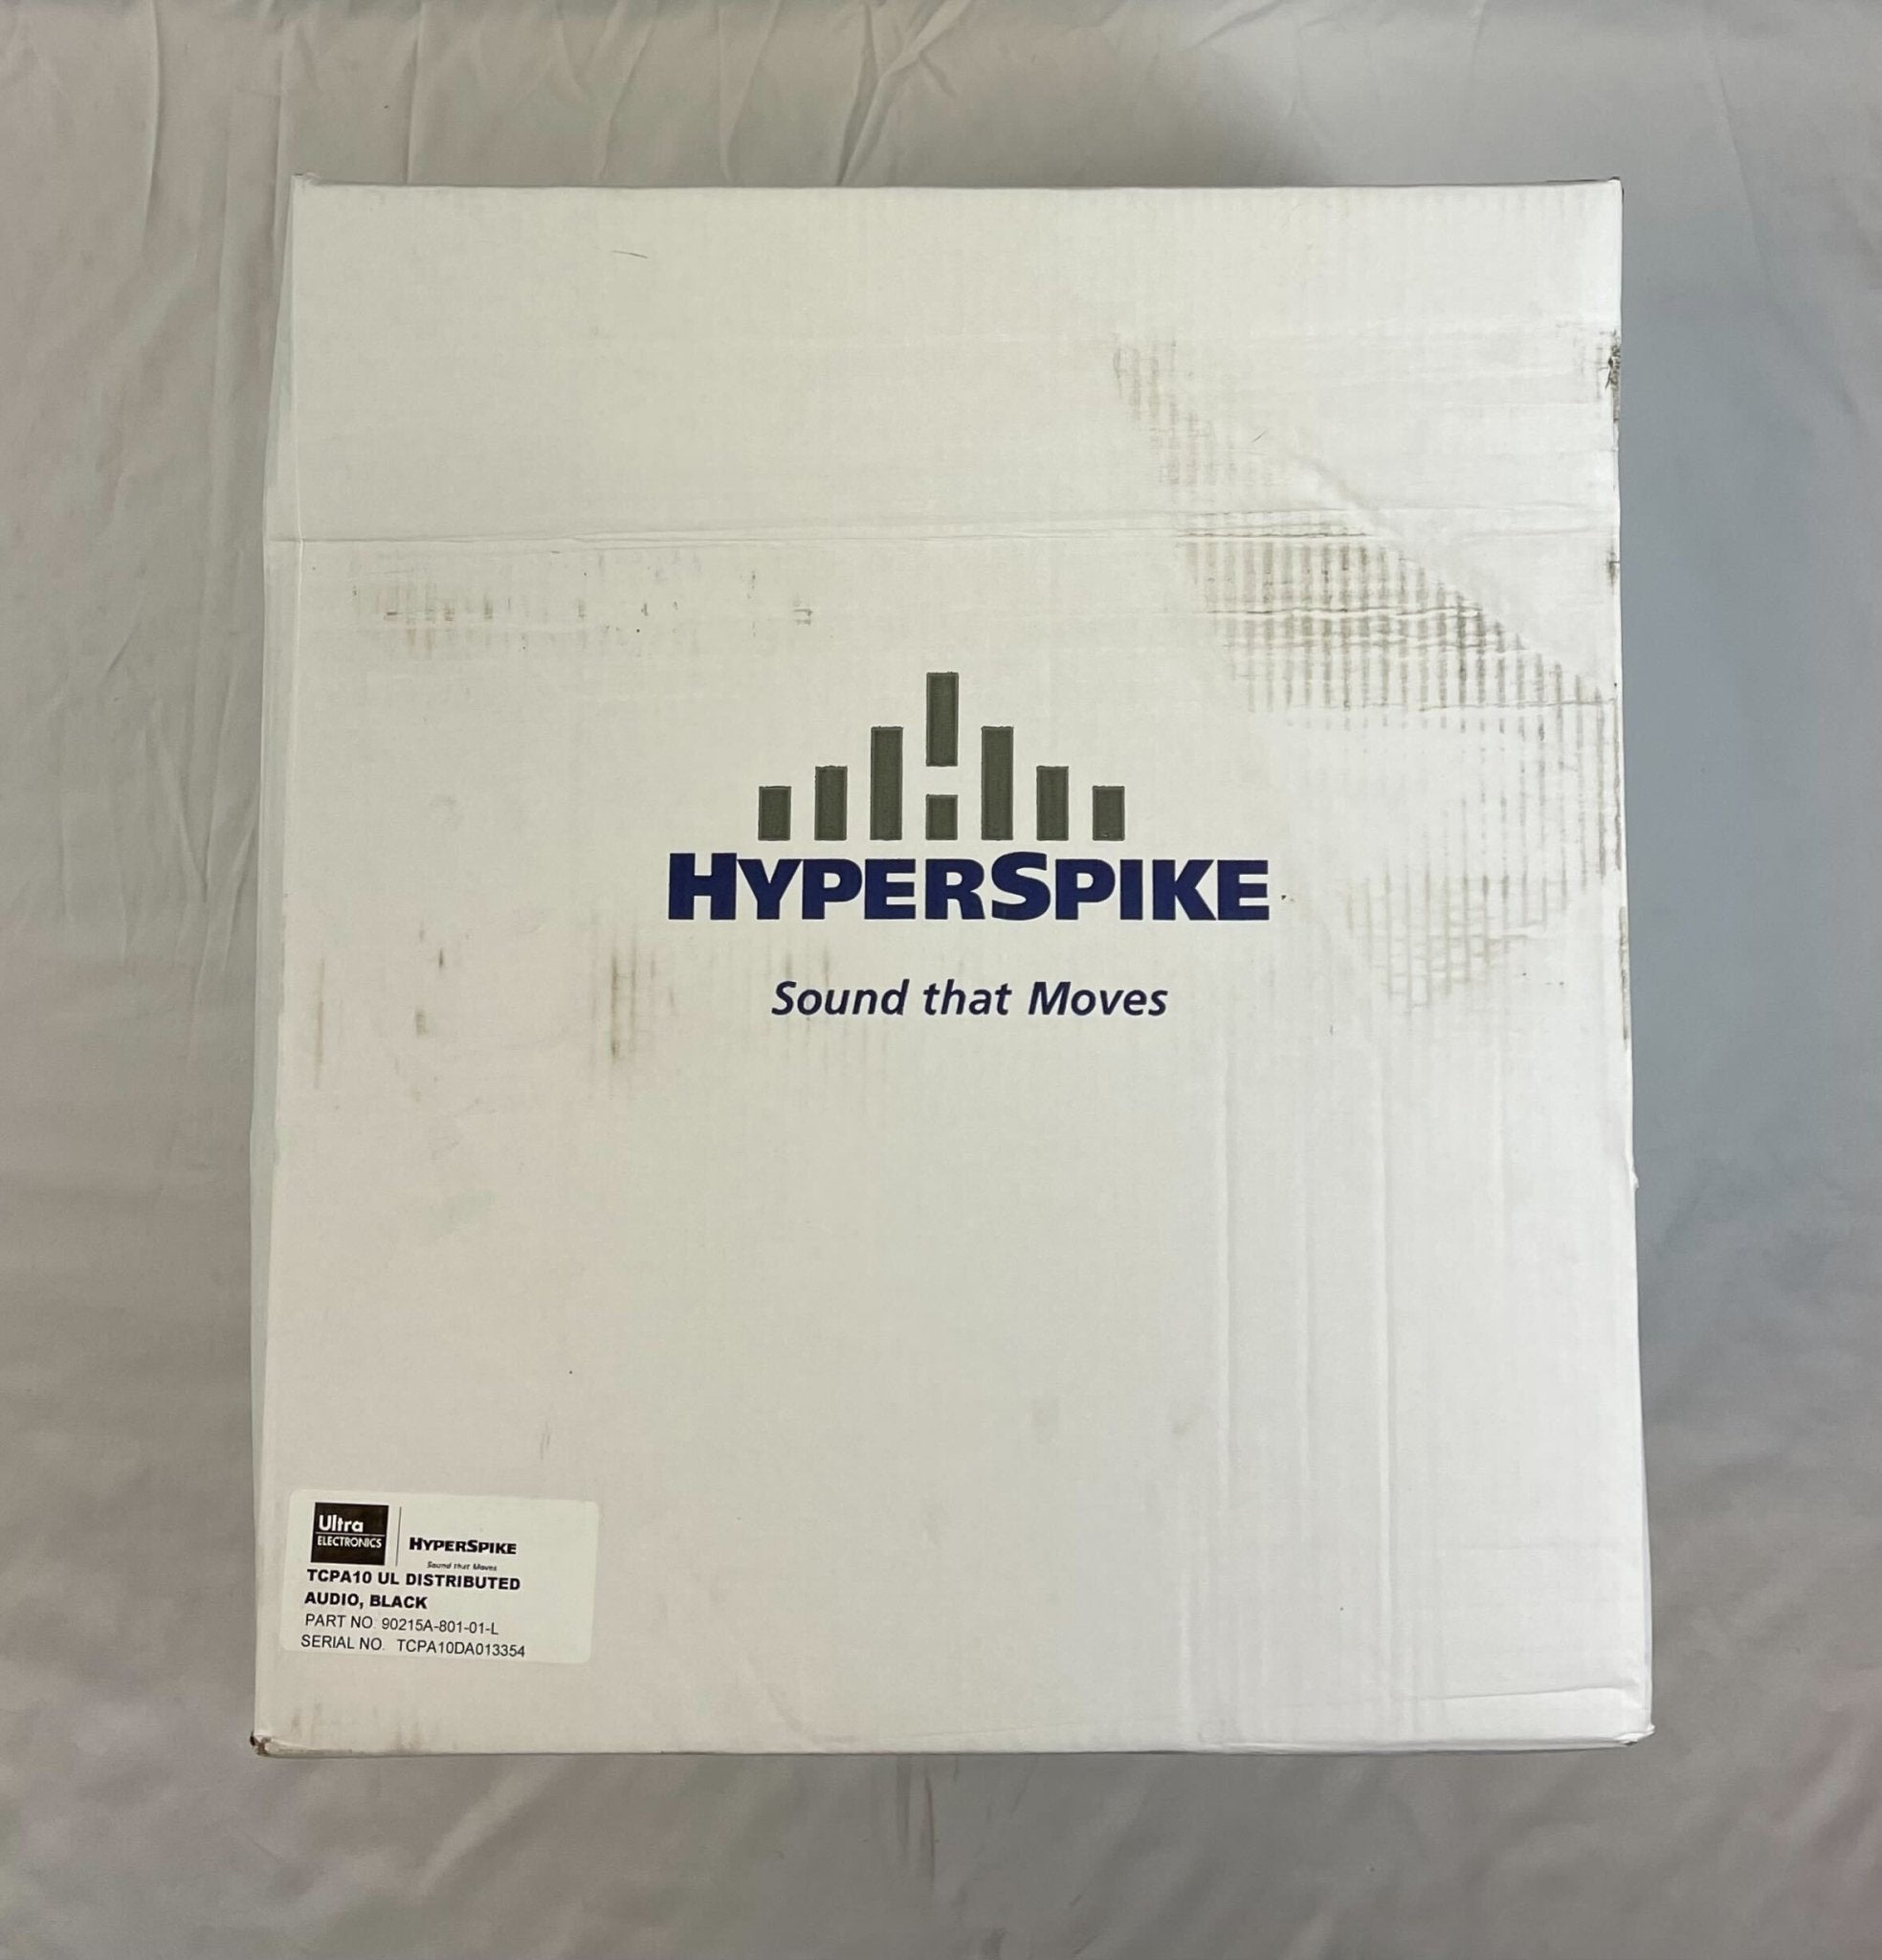 Hyperspike 90215A-801-01-L - The Fire Alarm Supplier